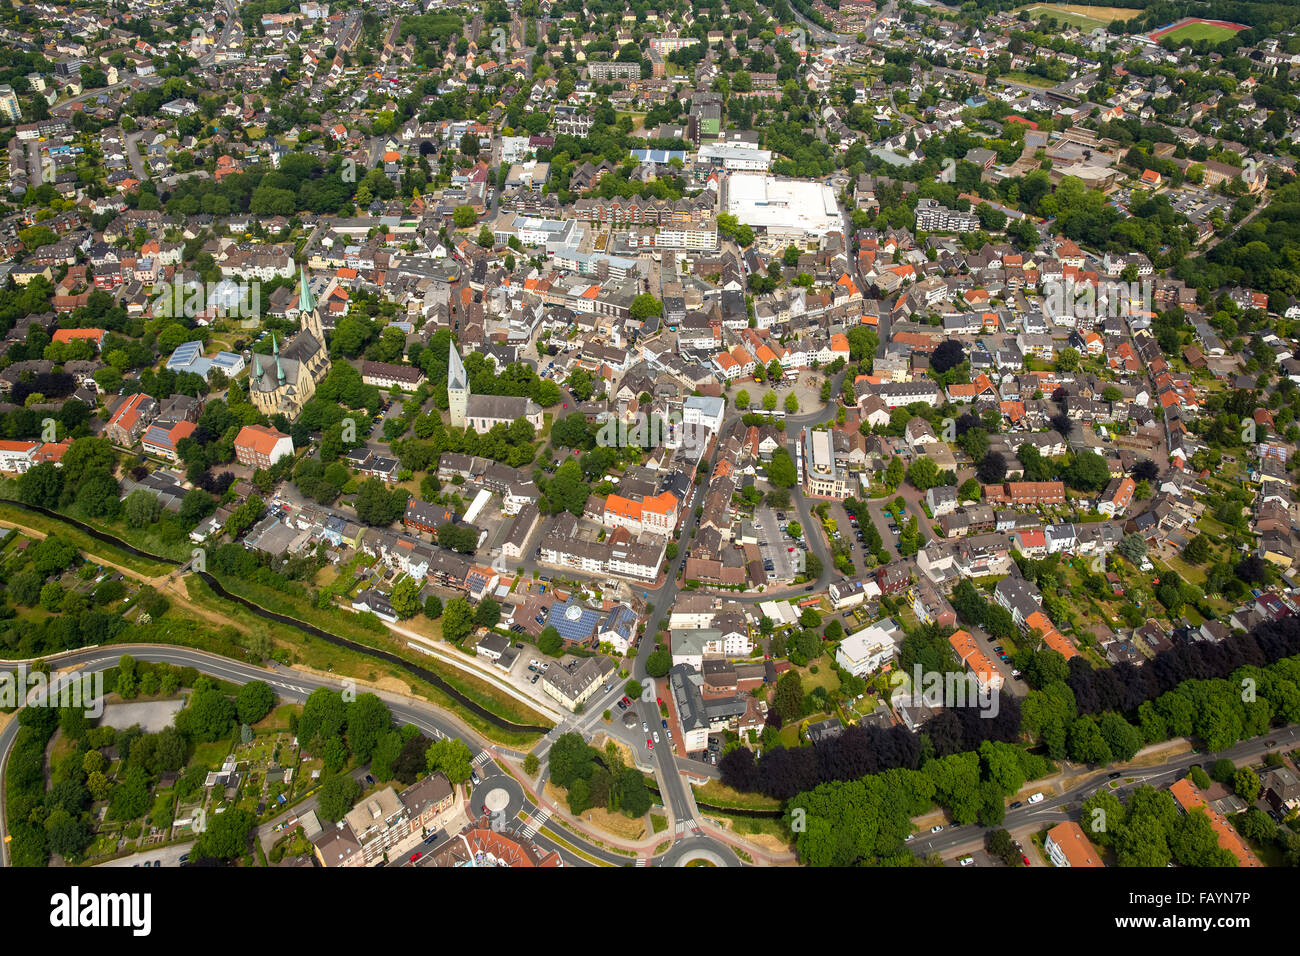 Aerial view, overlooking the town center of Kamen, Kamen, Ruhr area, North Rhine-Westphalia, Germany, aerial view, Stock Photo